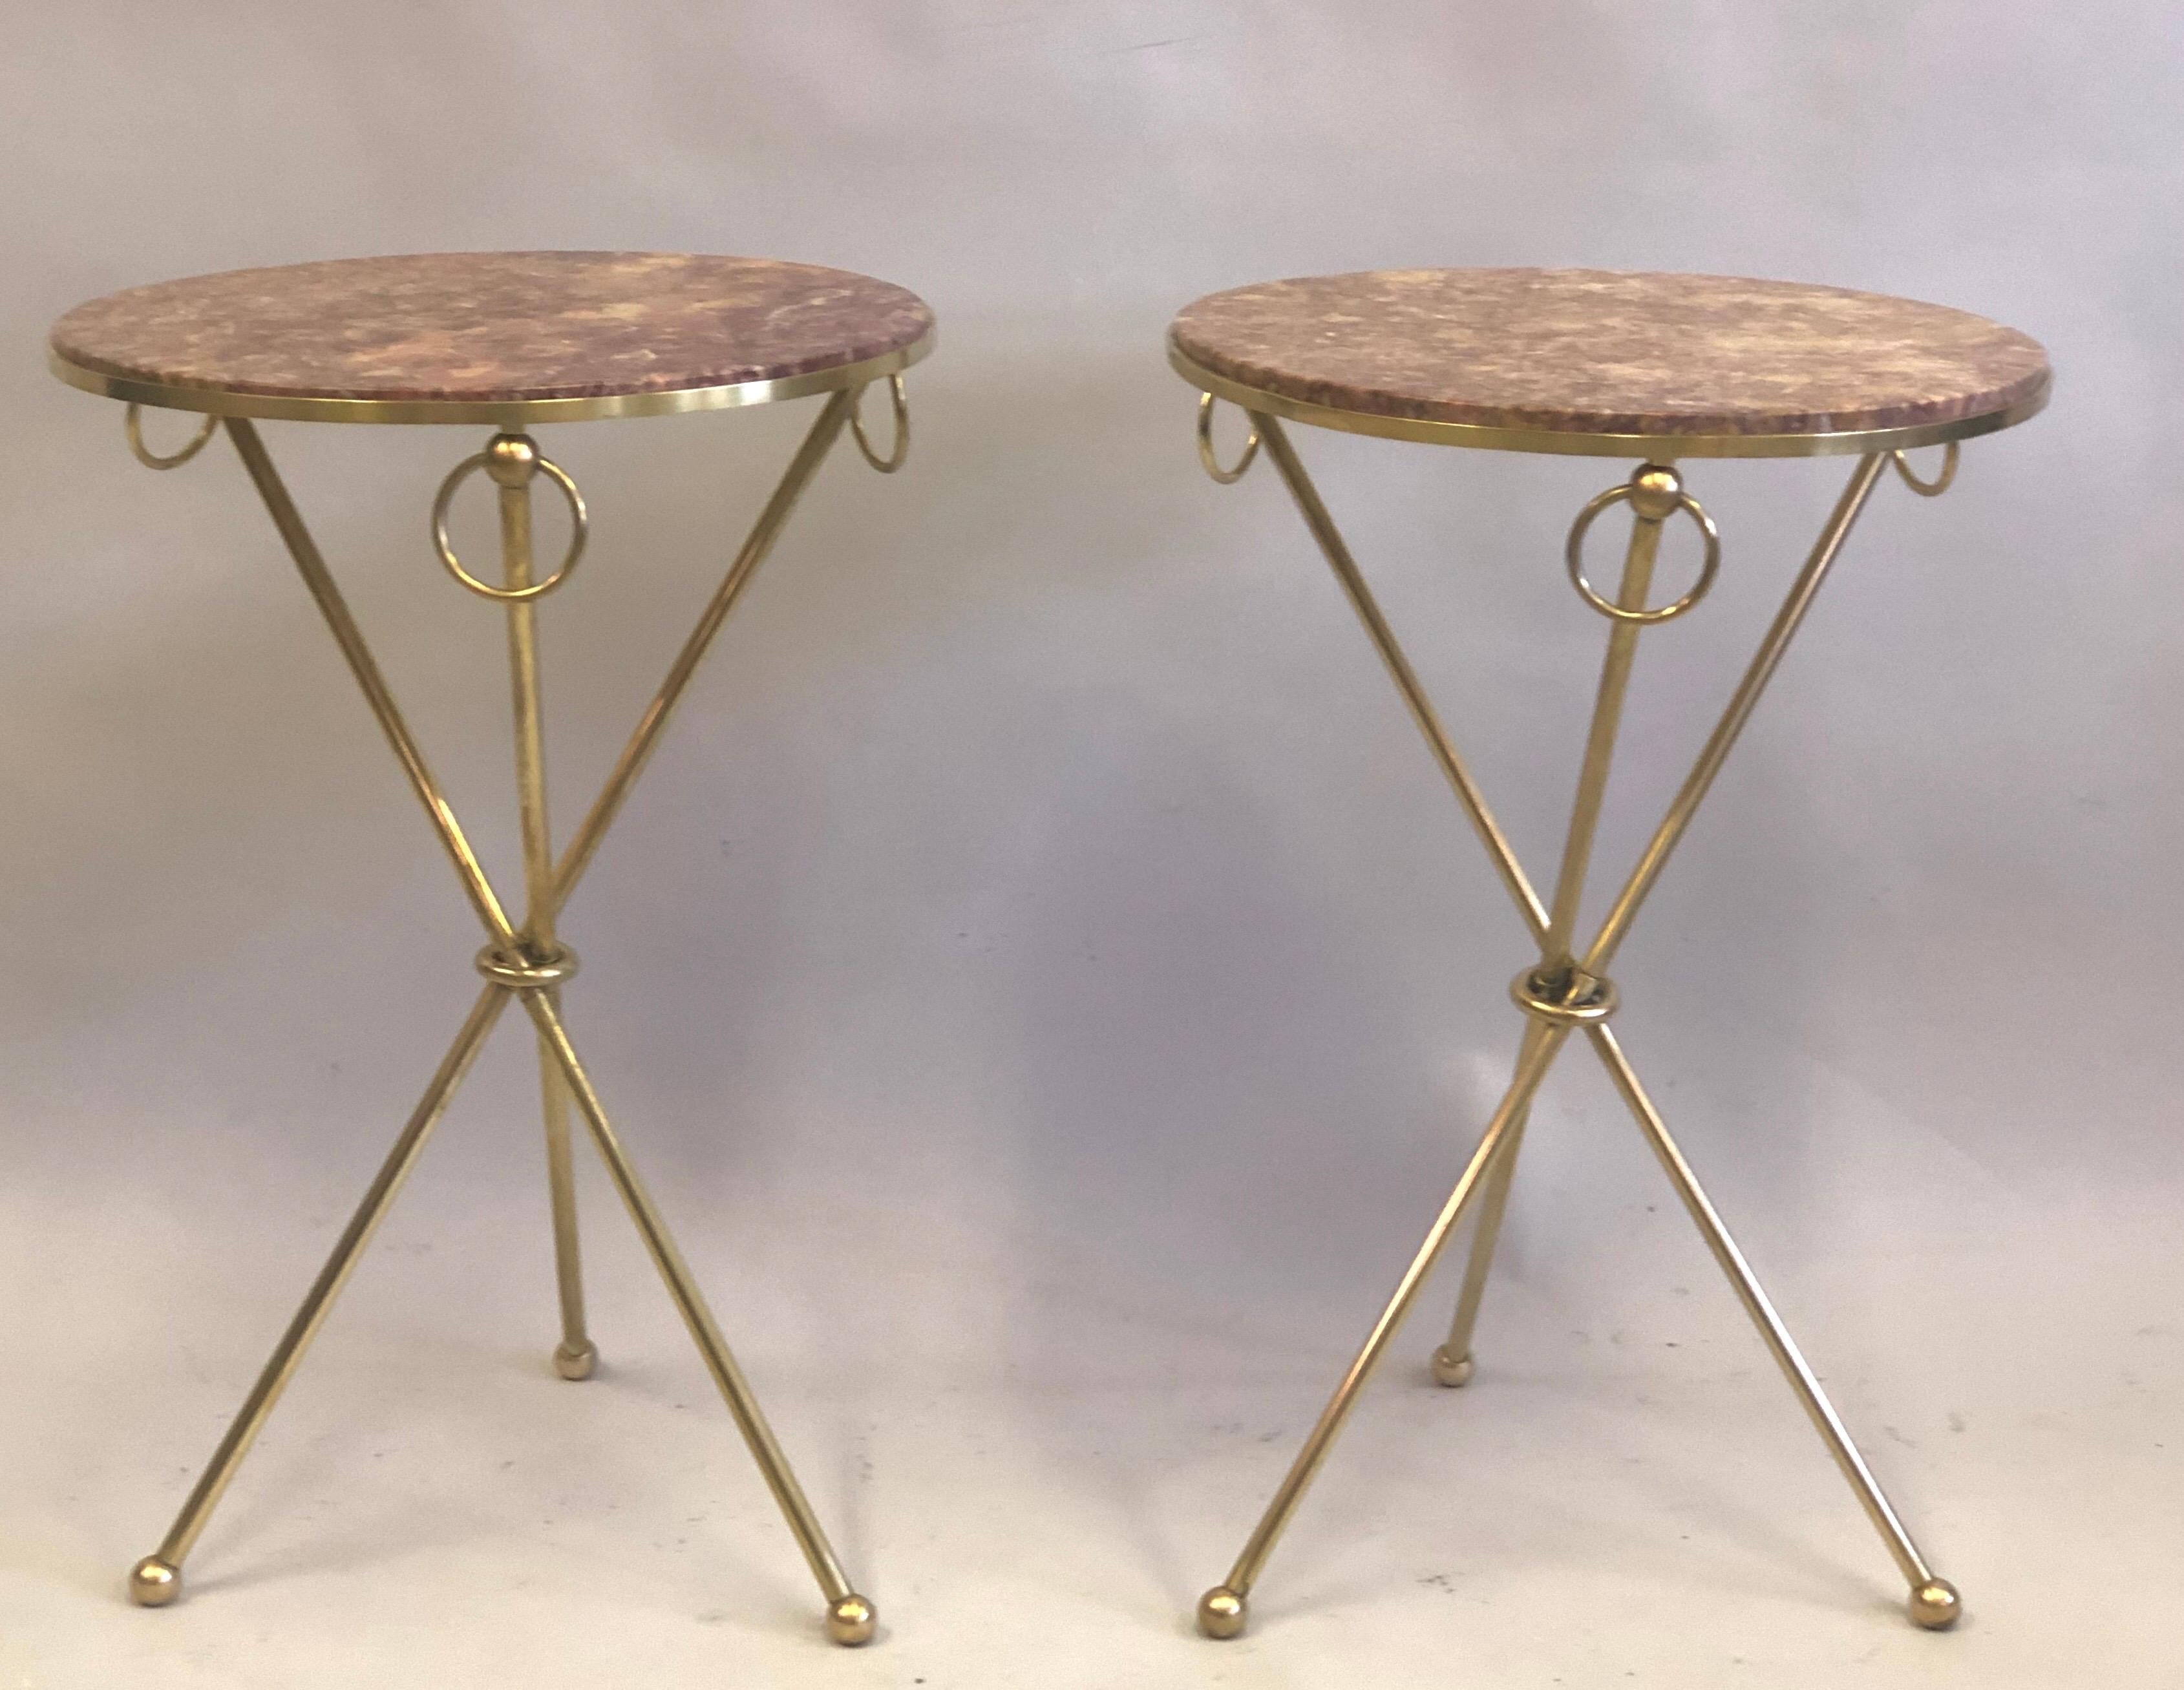 Pair of French Modern Neoclassical Brass & Marble Side Tables, Jean-Michel Frank 2